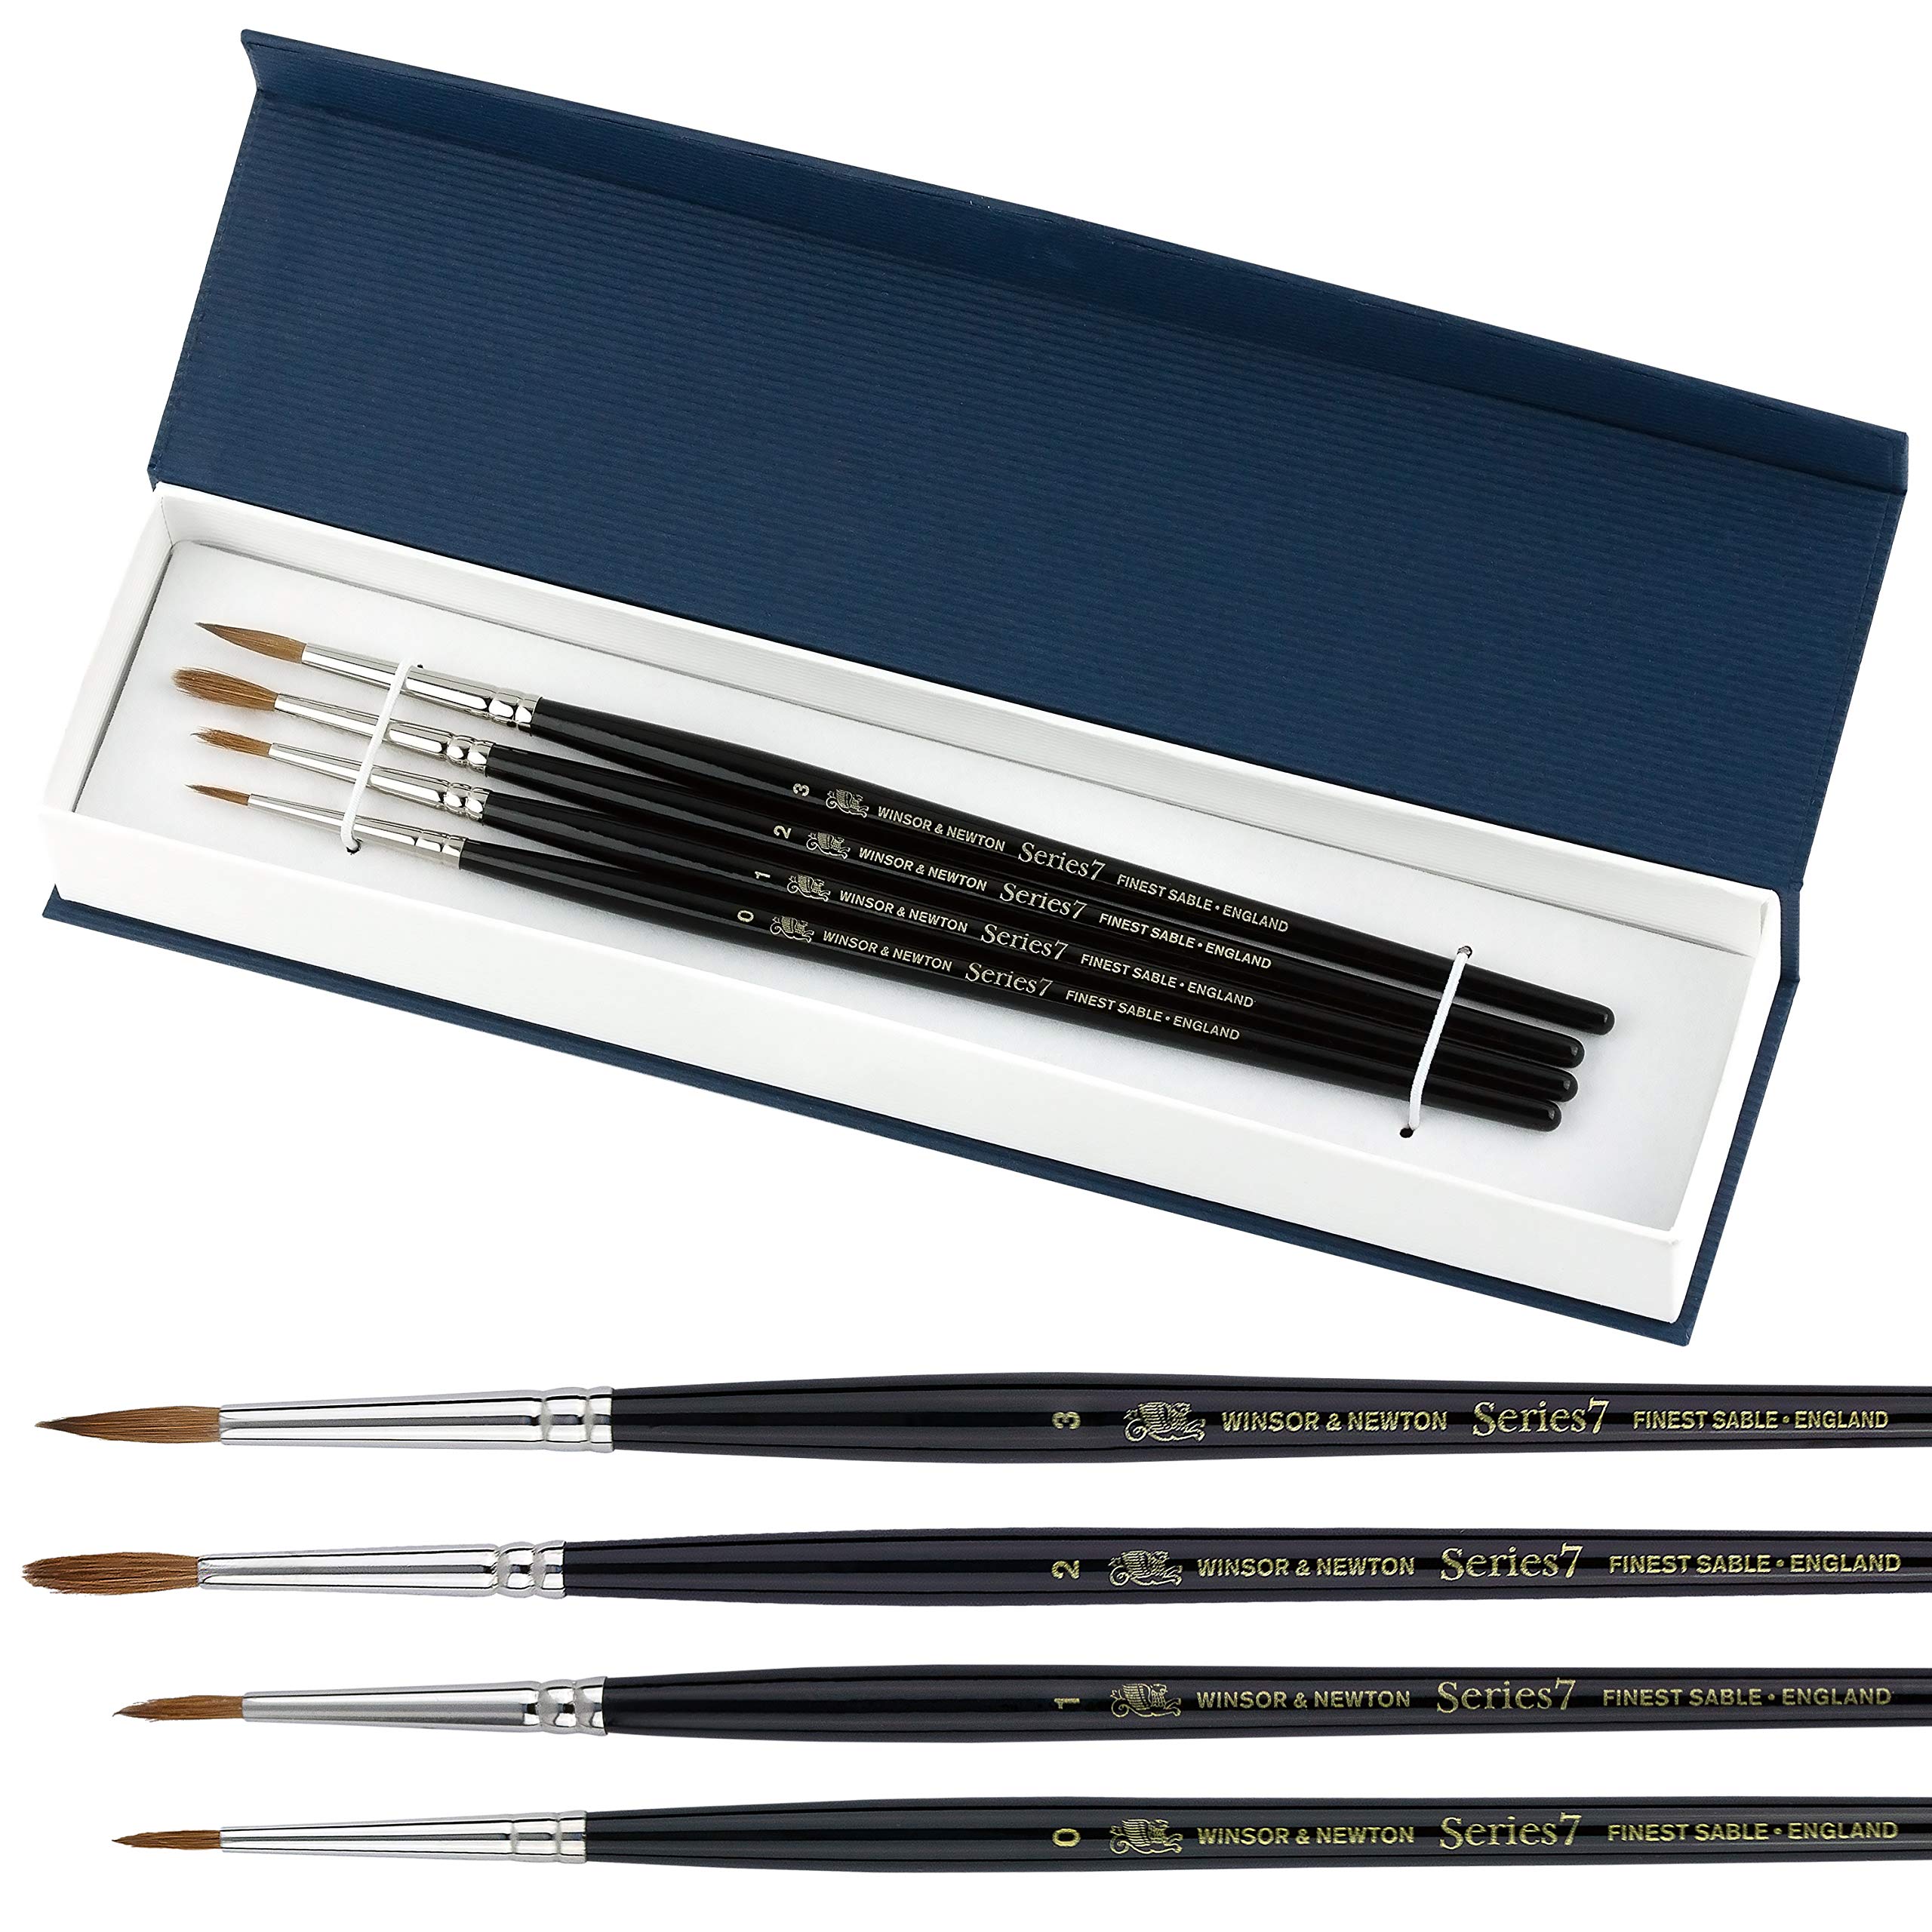 Winsor & Newton Series 7 Brushes neatly packed in an open box, showcasing superior craftsmanship and quality.